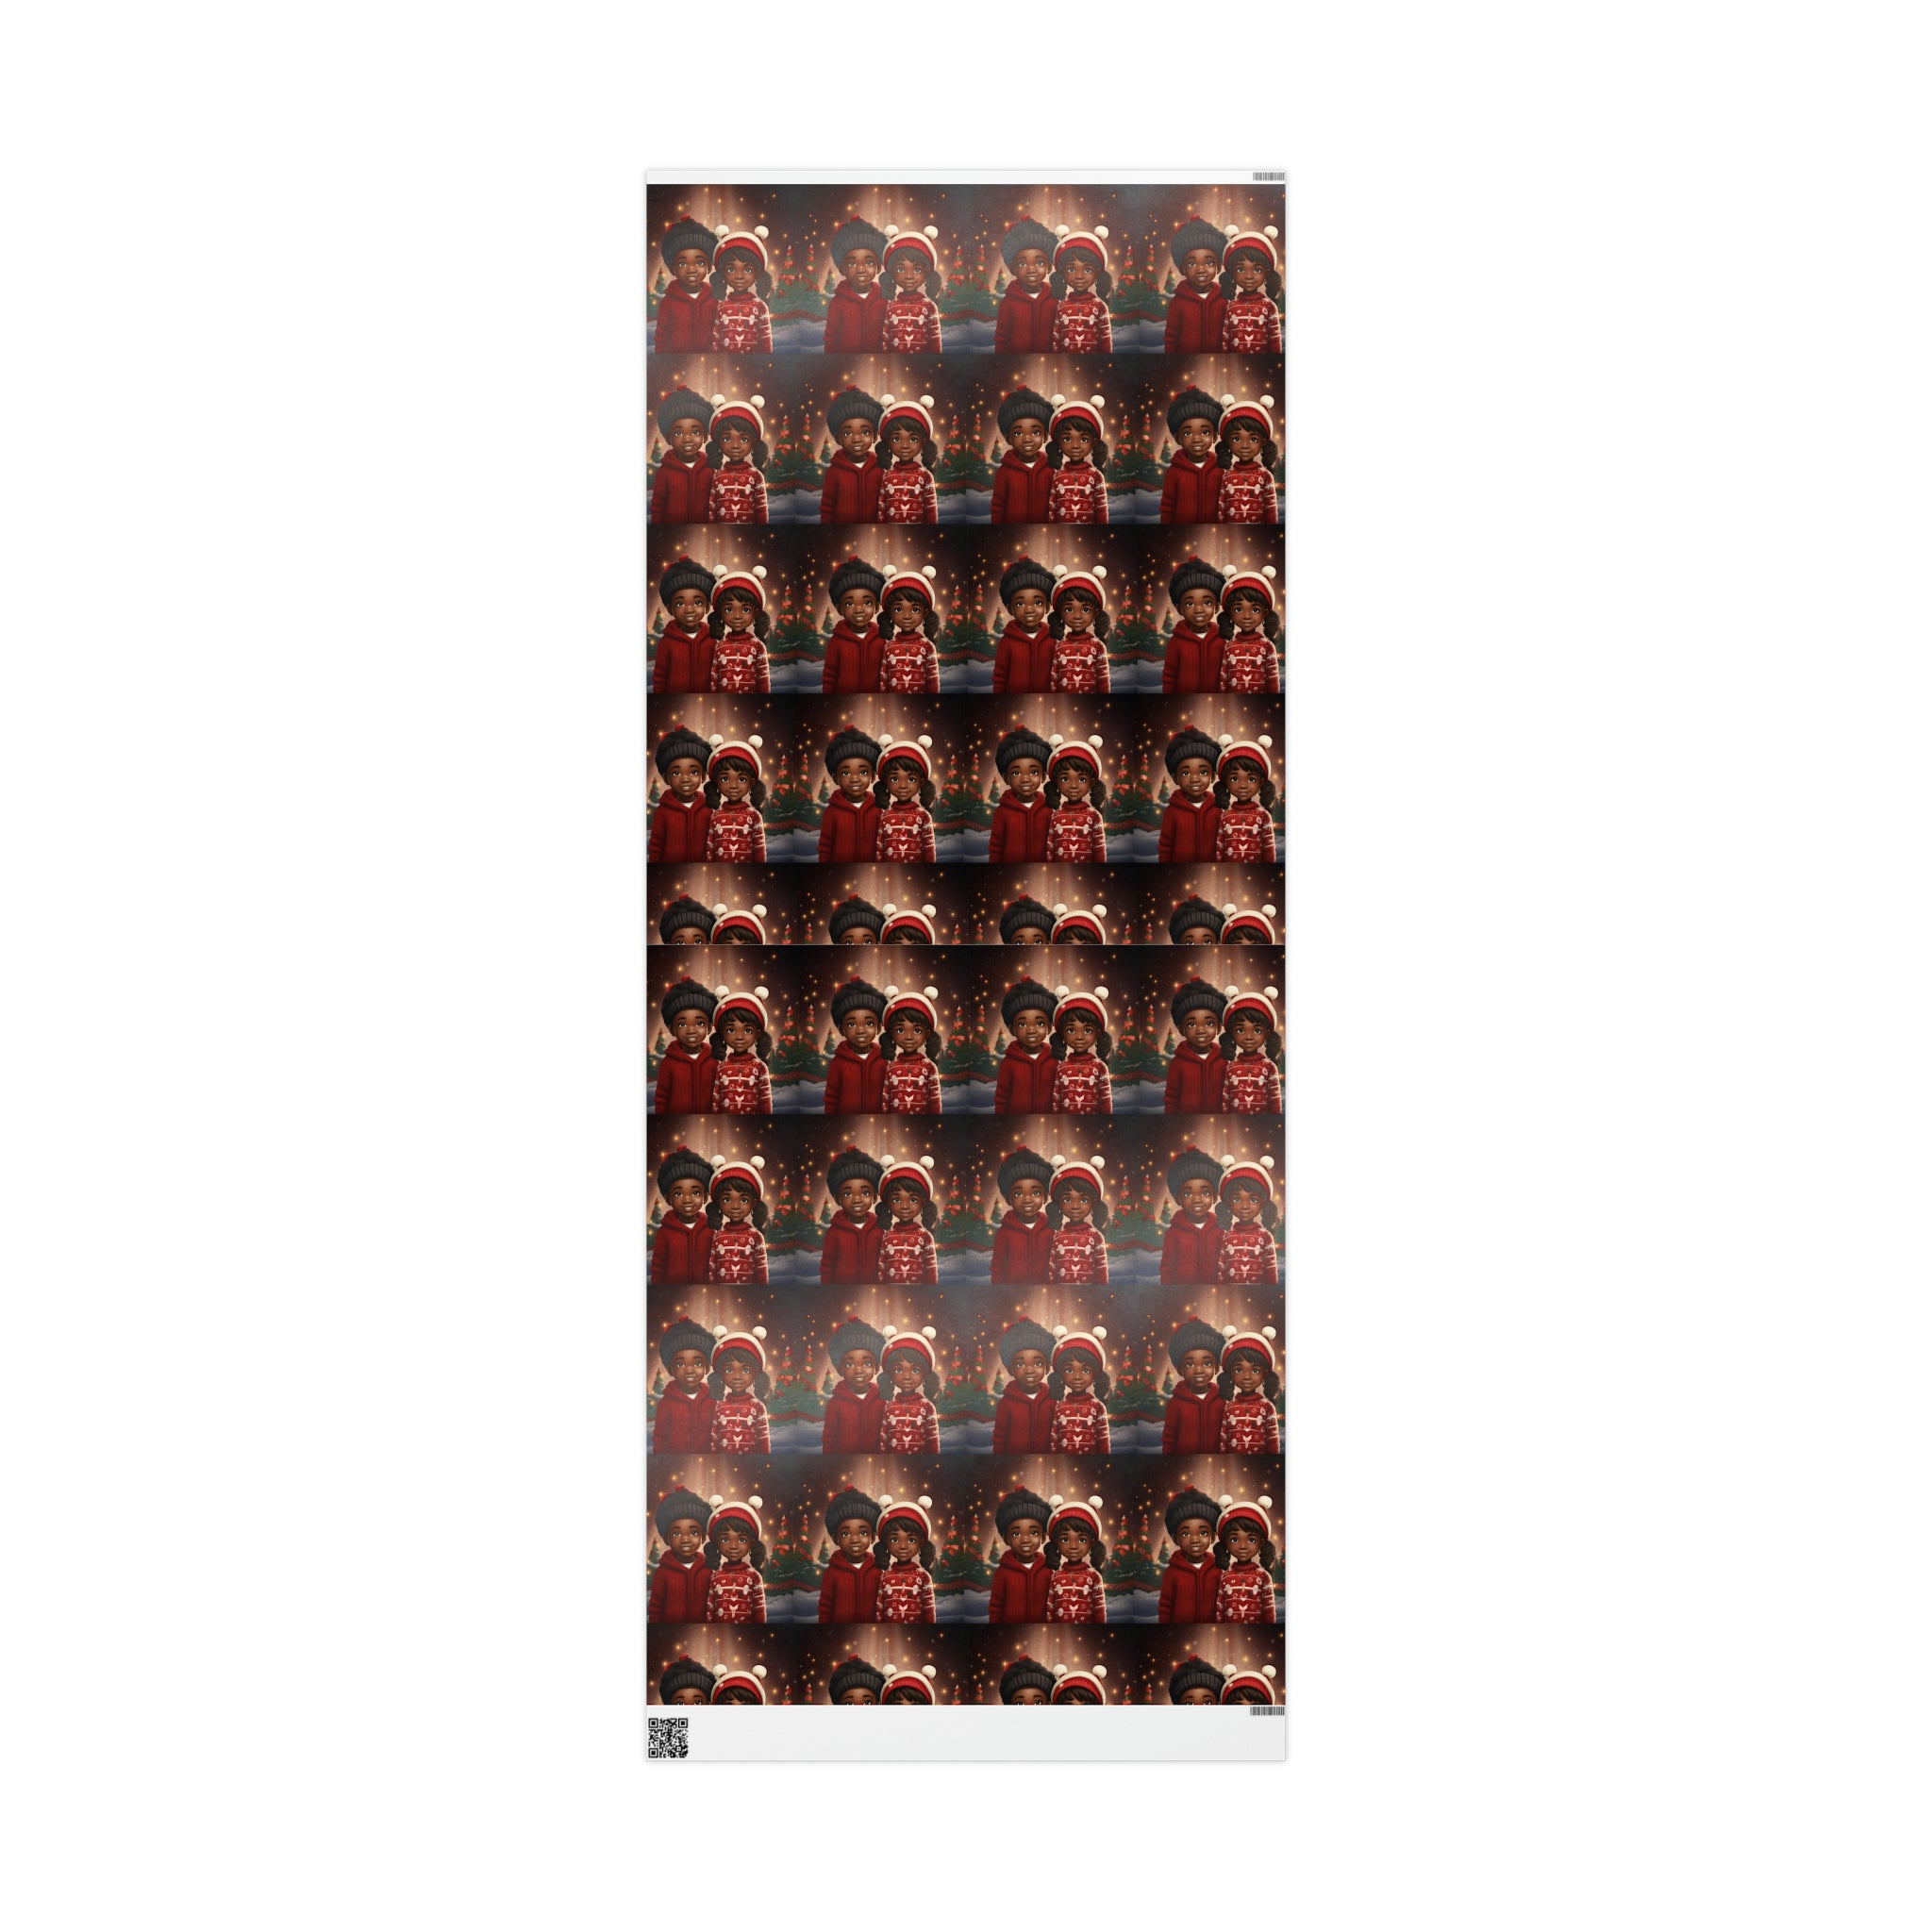 Black Siblings Christmas Theme Wrapping Papers